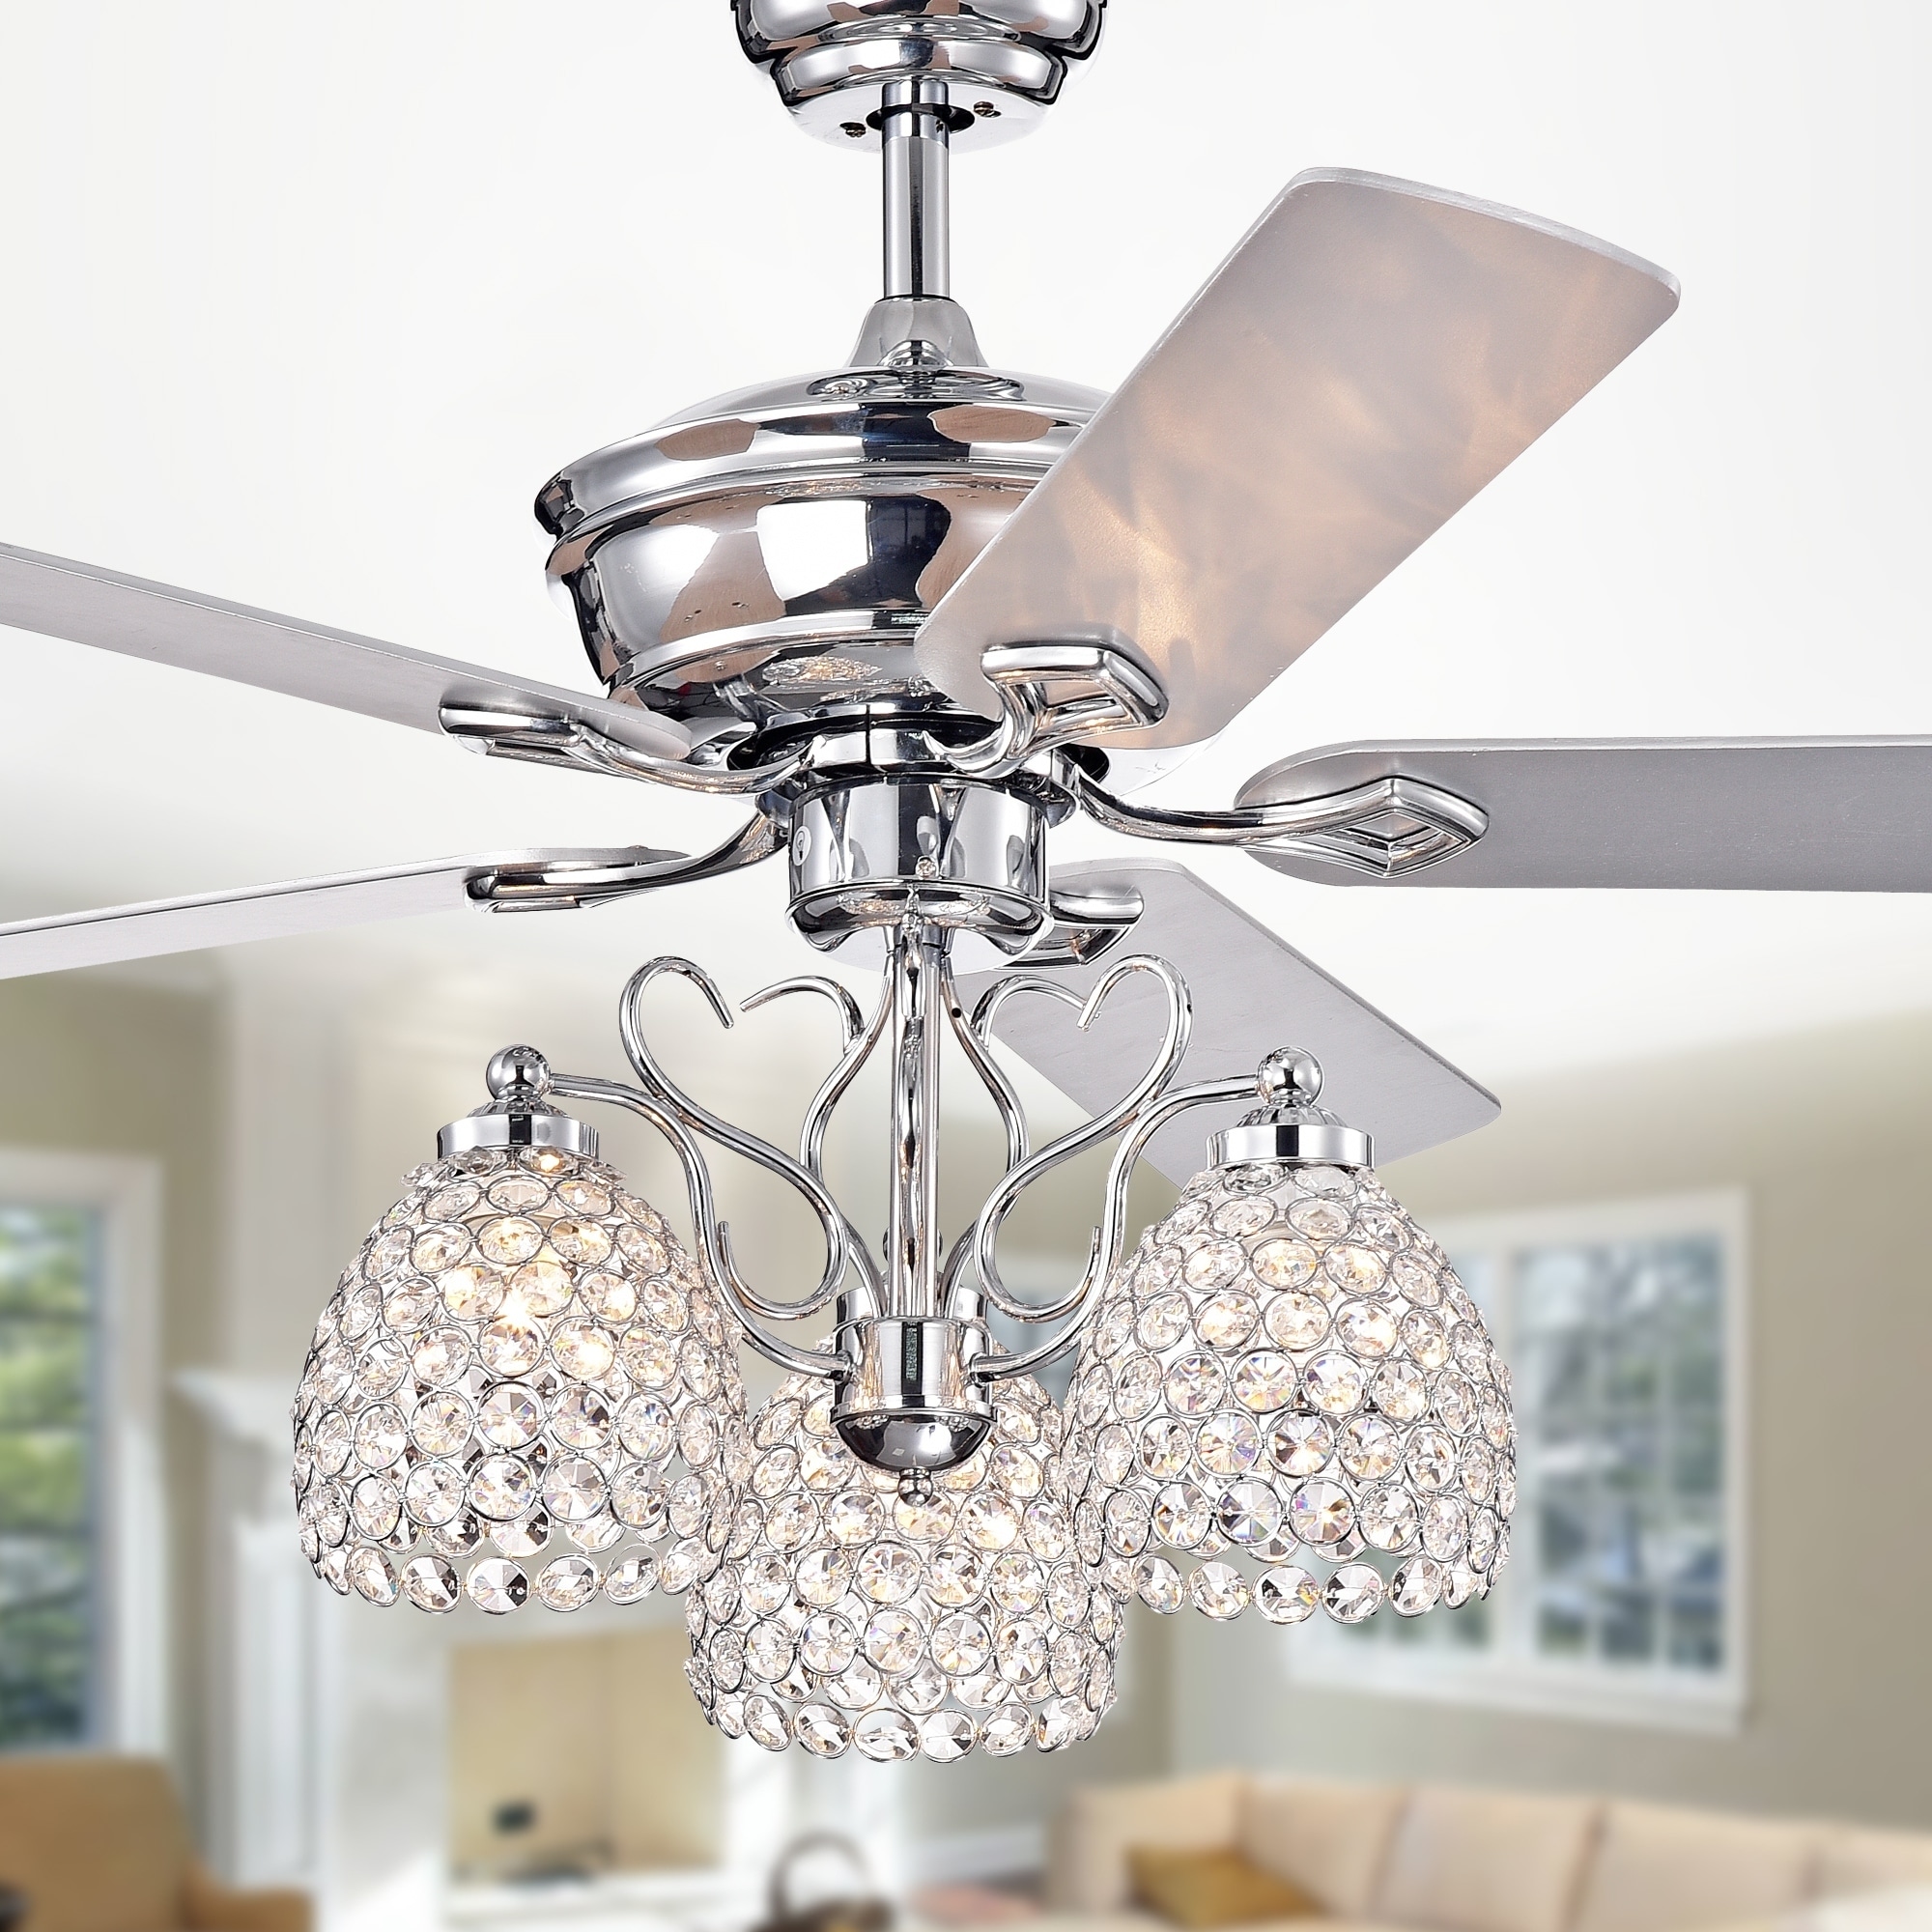 Boffen 52-inch 3-light Lighted Ceiling with Crystal Cup Shades (incl. Remote & 2 Color Option Blades) - - 27617926